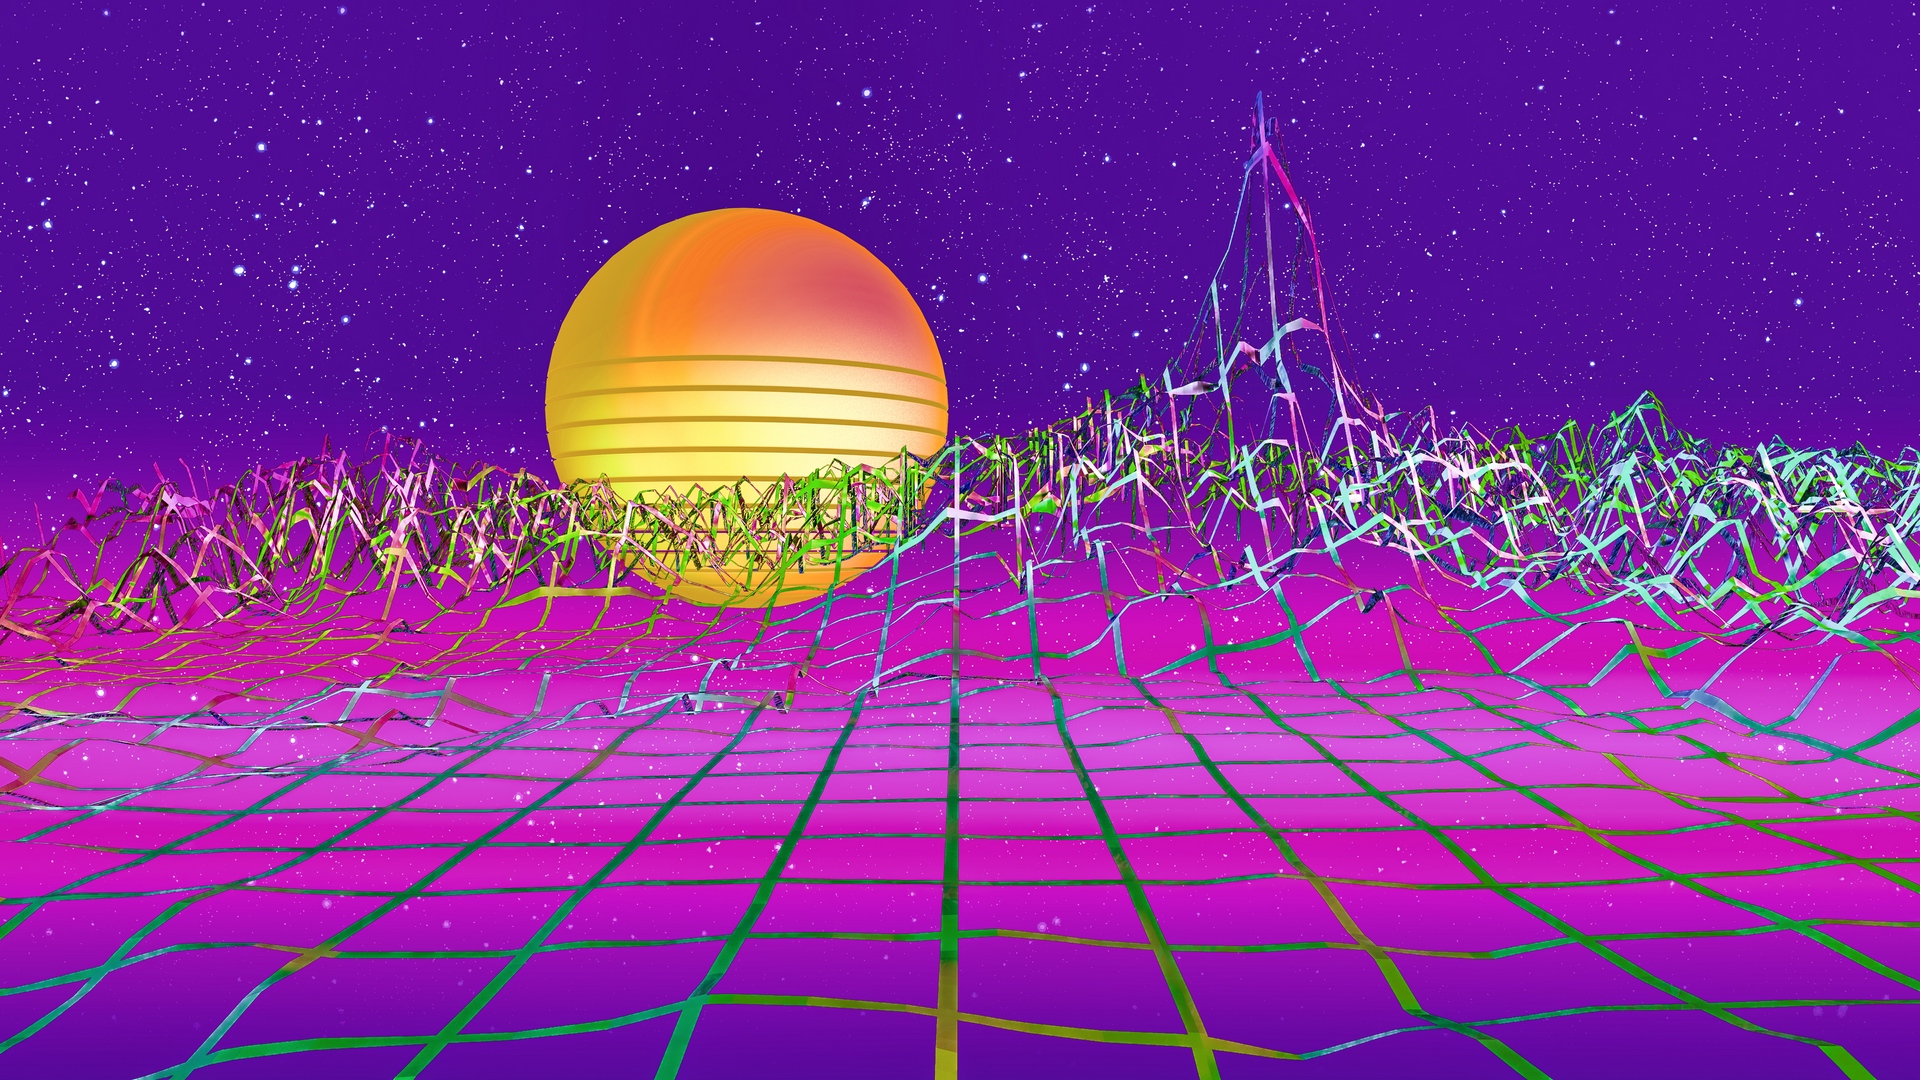 Download wallpaper 1920x1080 retrowave, art, retro, synthwave, sun, relief, grid full hd, hdtv, fhd, 1080p HD background